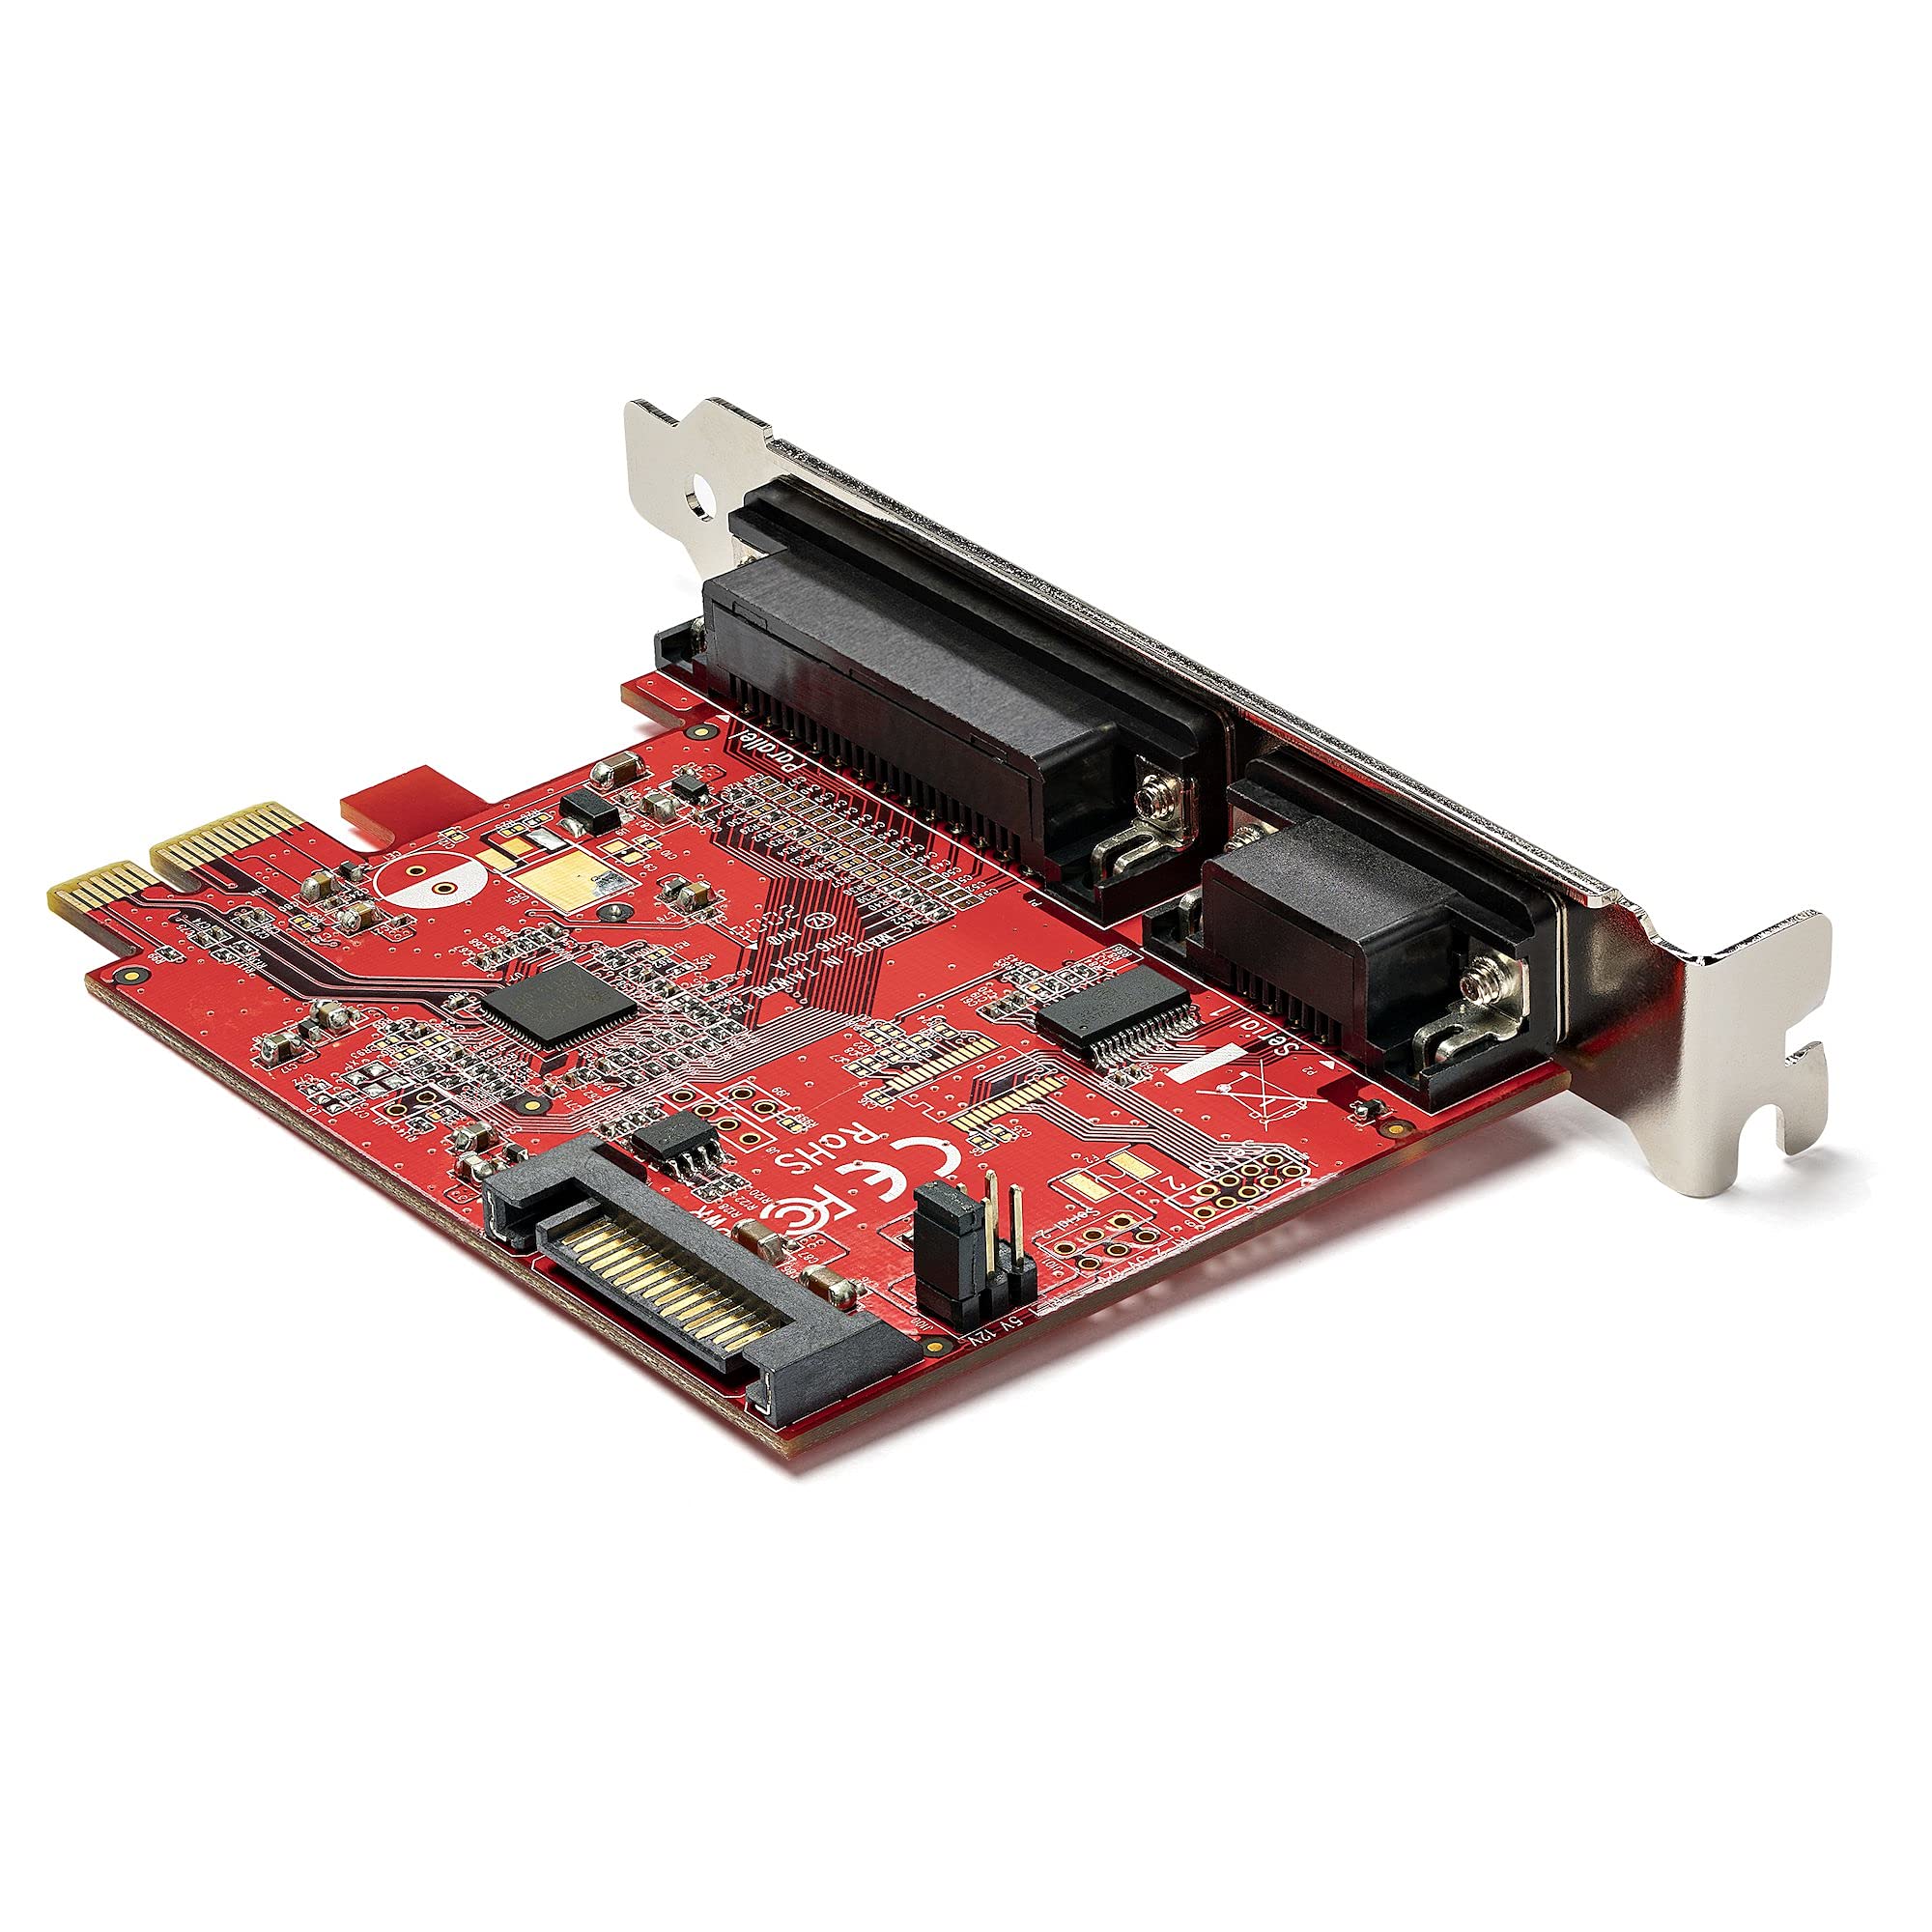 StarTech.com PCIe Card with Serial and Parallel Port - PCI Express Combo Adapter Card with 1x DB25 Parallel Port & 1x RS232 Serial Port - Expansion/Controller Card - PCIe Printer Card (PEX1S1P950)